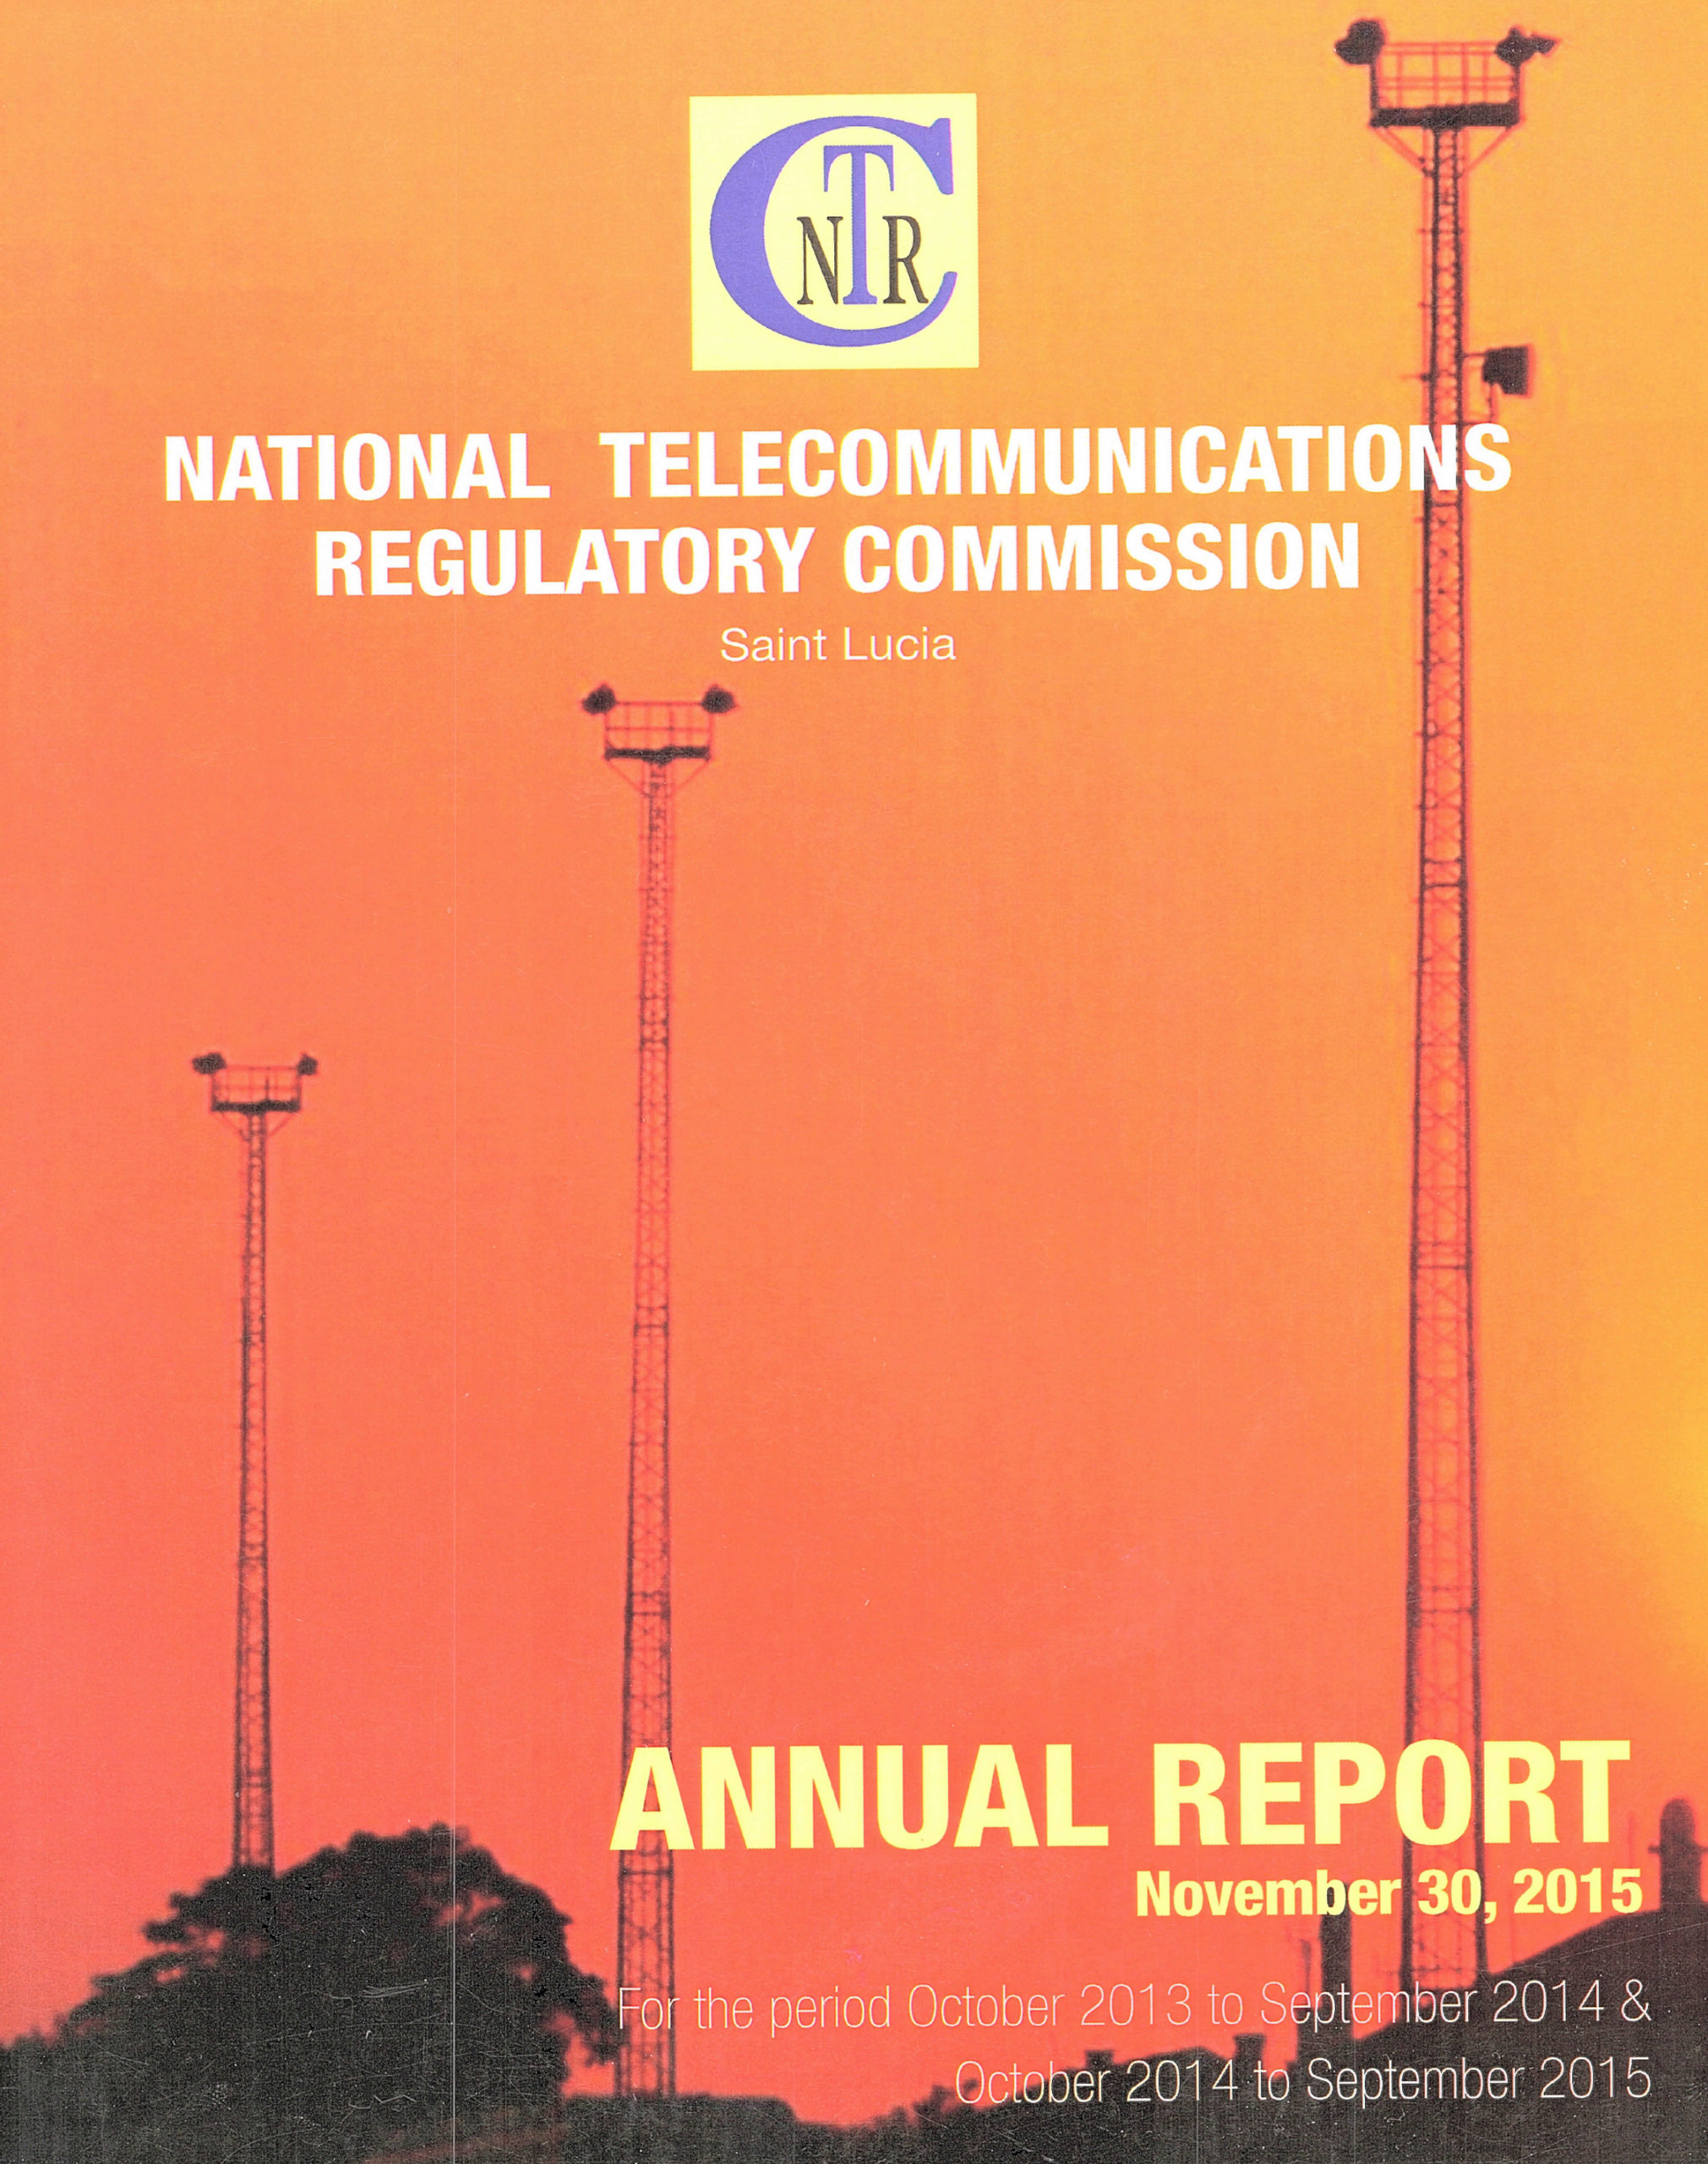 Annual Report Period October 2013 to September 2015